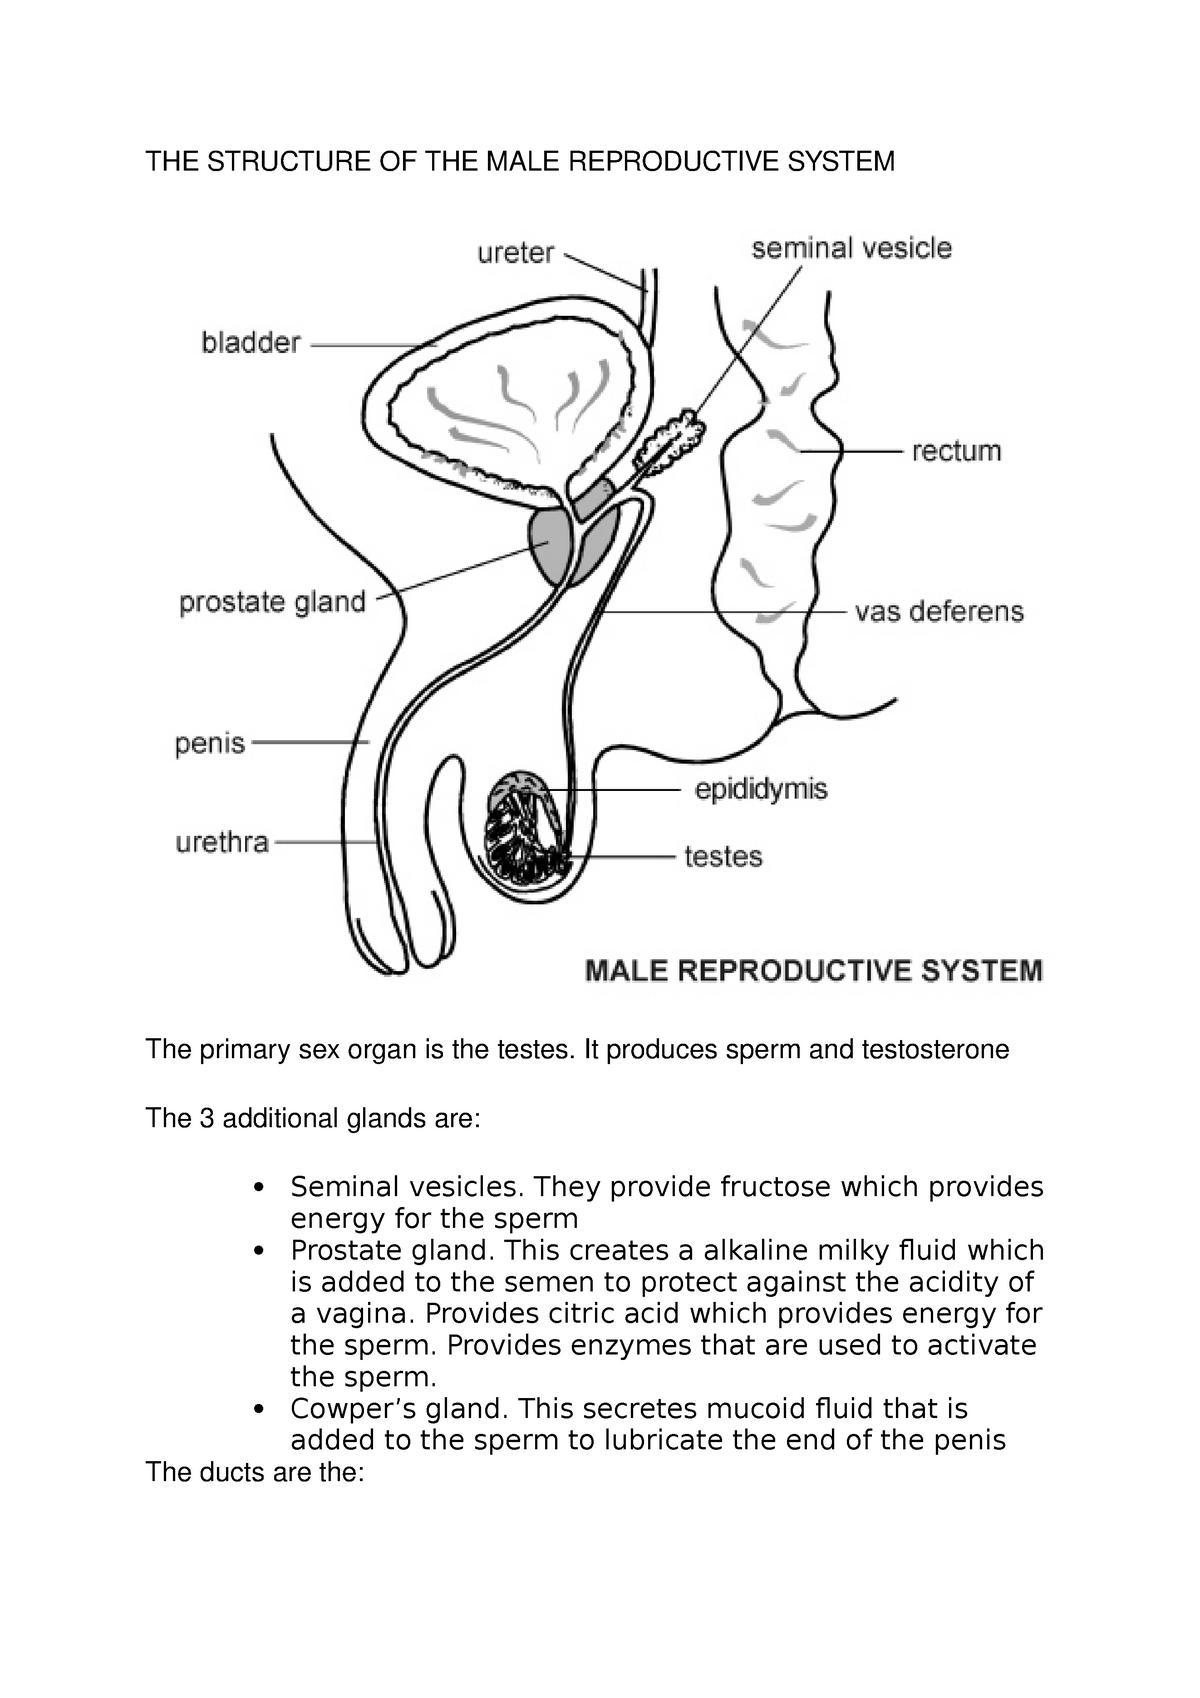 Grade 12 Ieb Life Sciences Notes Reproductive Systems The Structure